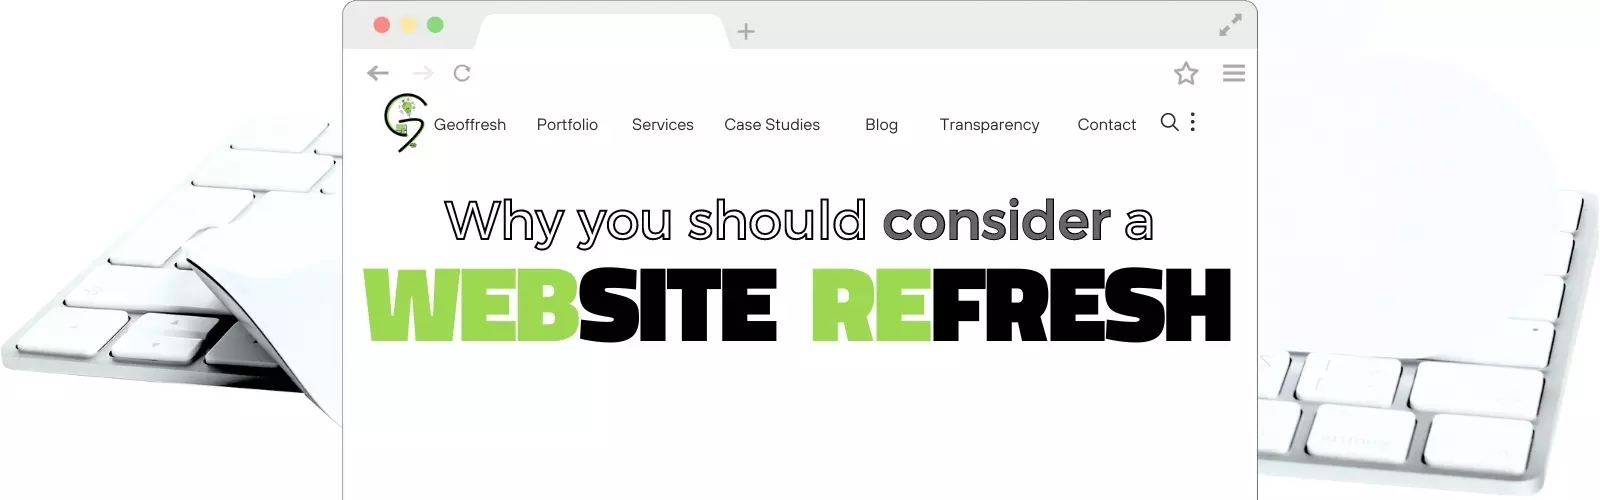 Thinking About Giving Your Website a Fresh Look? Here's Why You Should Consider a Website Refresh